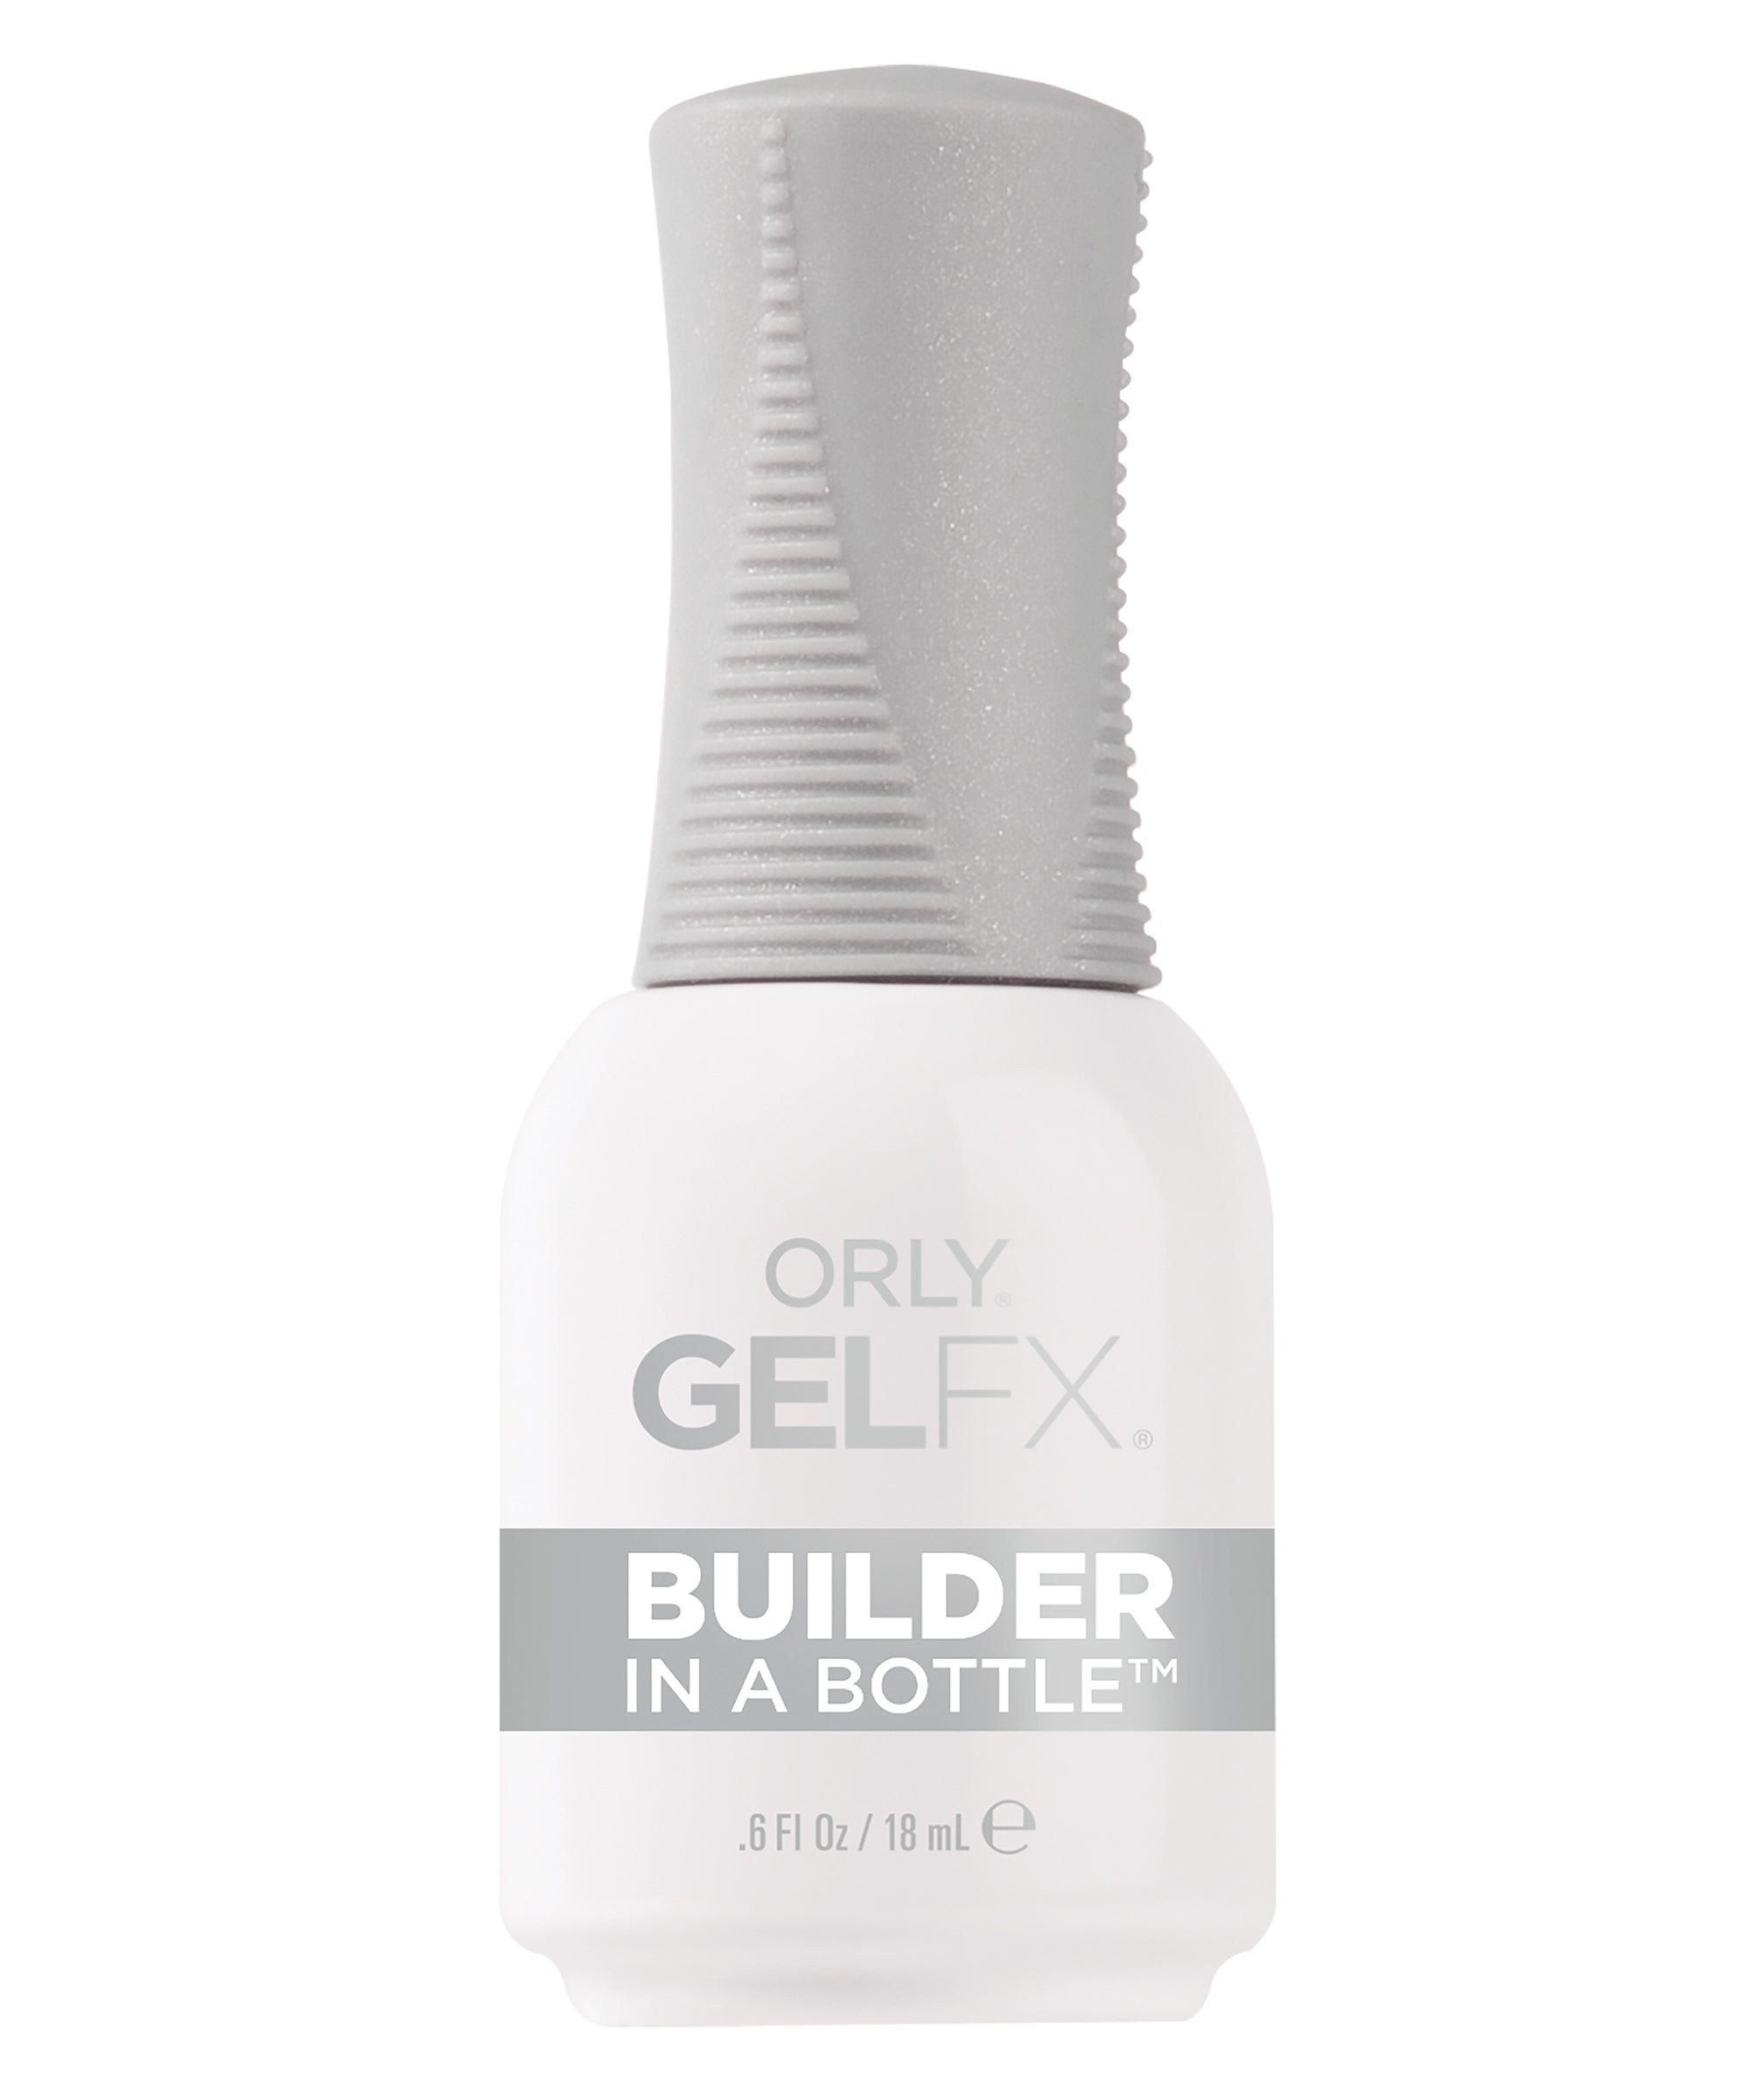 Orly Gel FX Builder In A Bottle Nail Extensions Review